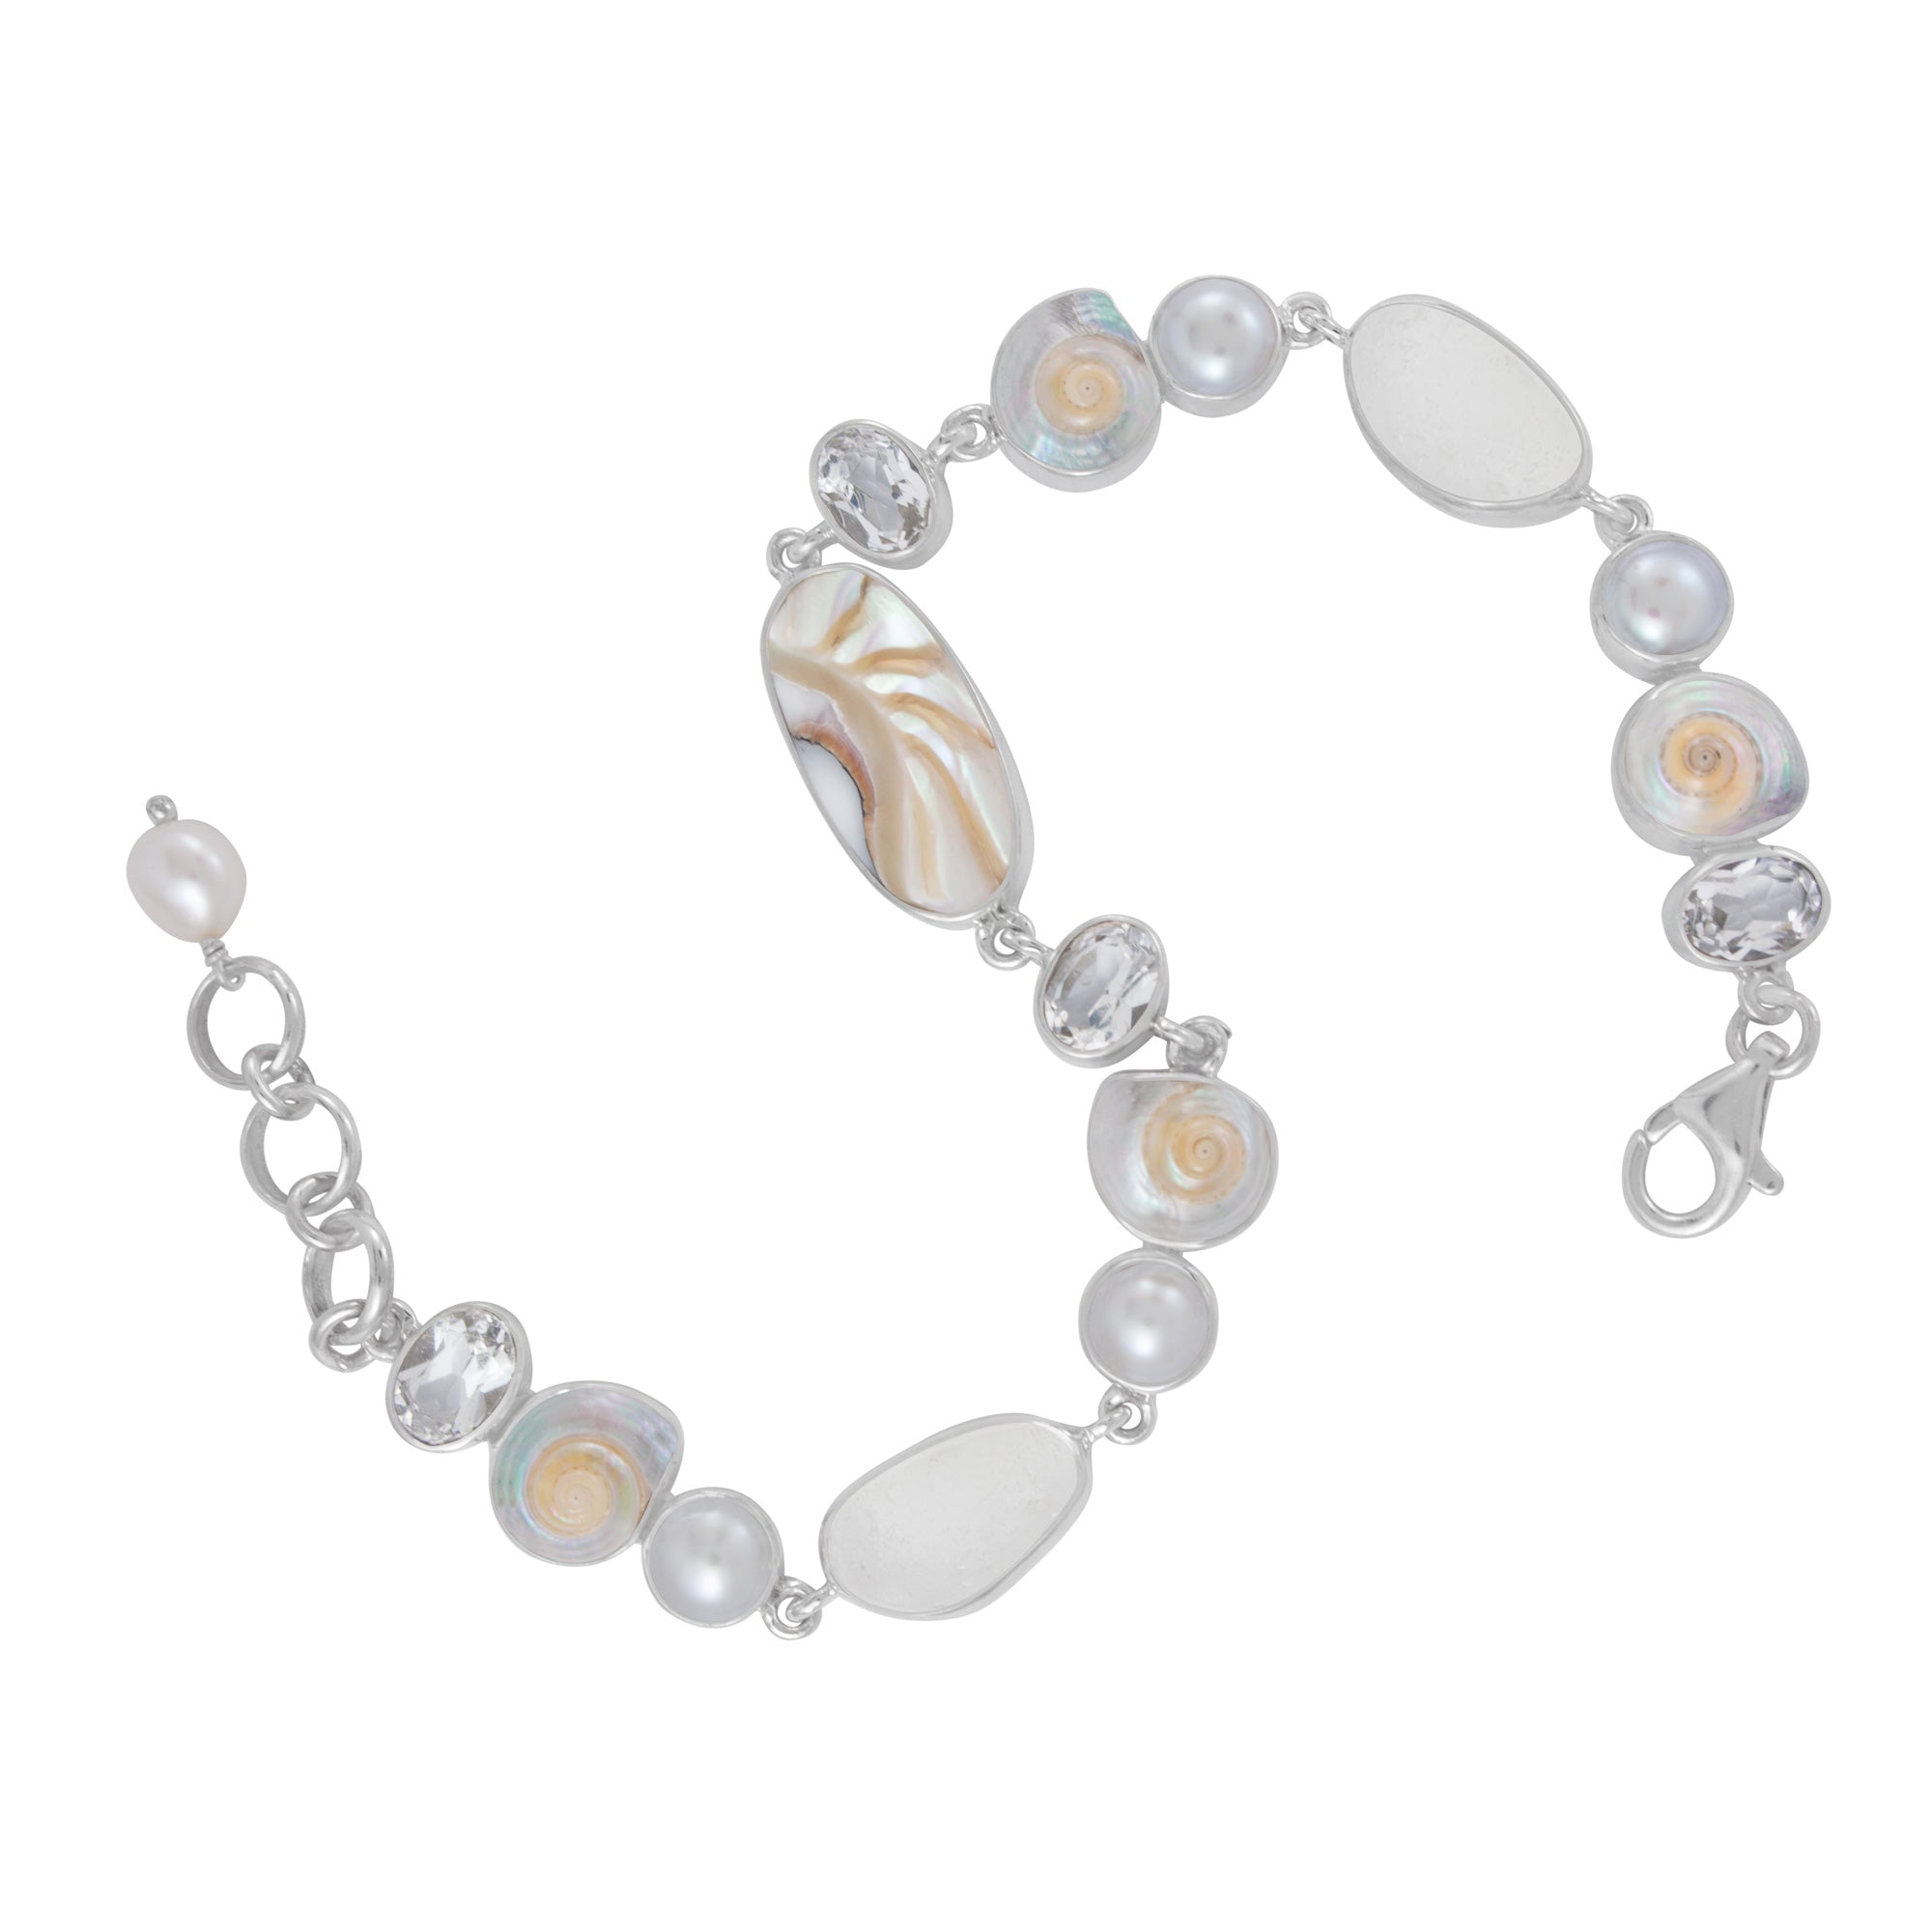 Sterling Silver Bracelet With Shell Malabar Turbos, Nautilas Oval, White Topaz Oval Facet And Pearl